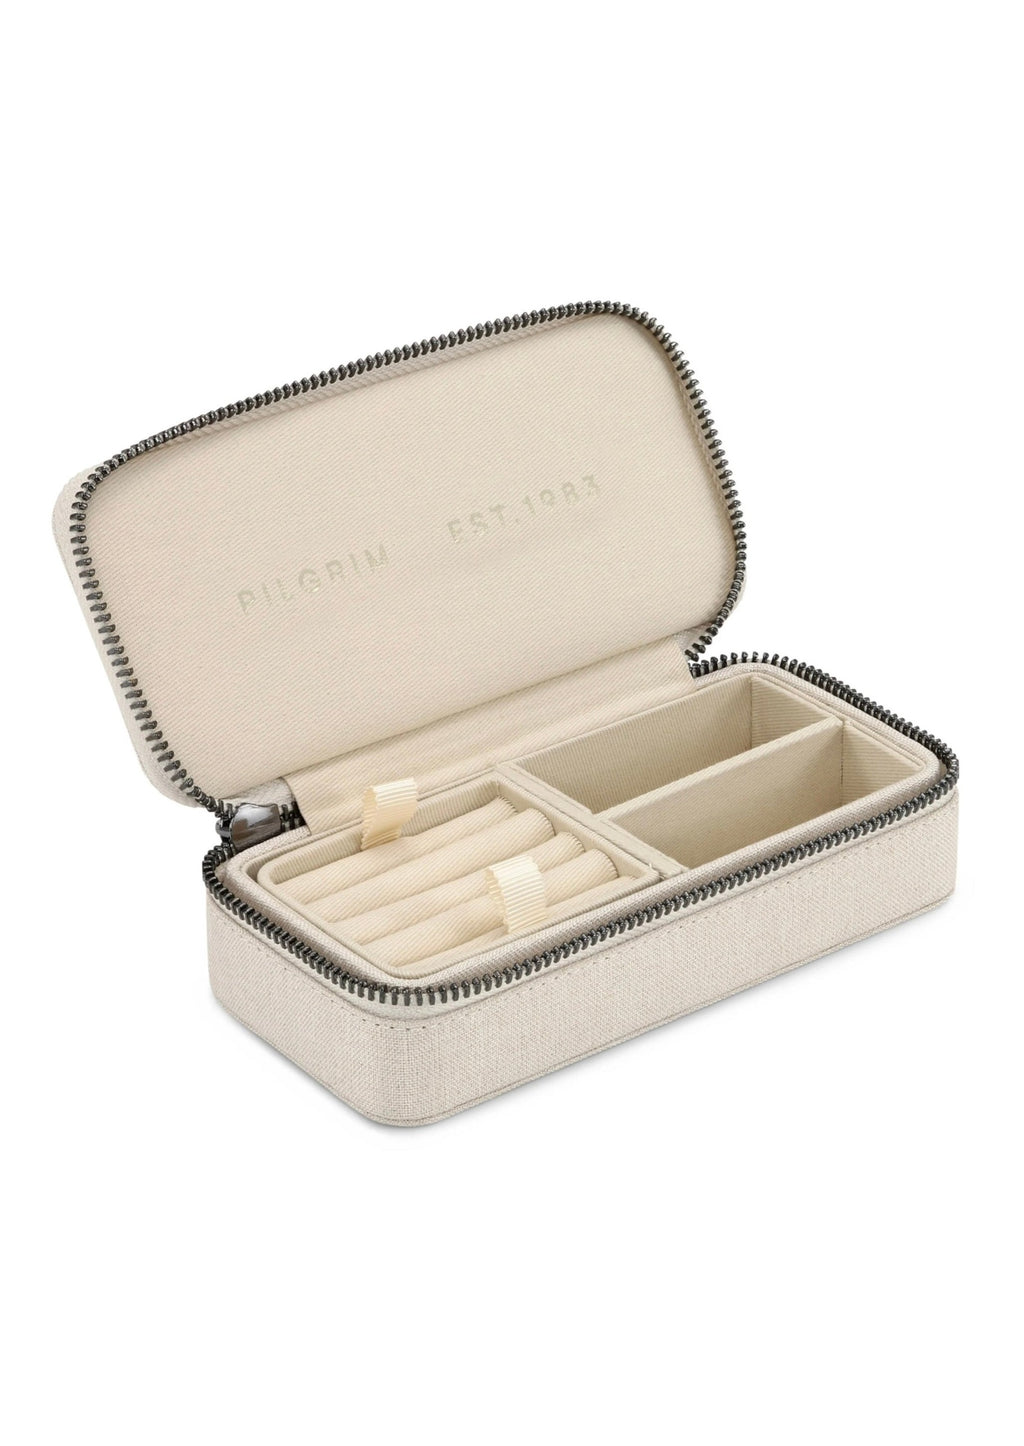 <h3>Pilgrim Jewellery Box - Light Sand</h3> <ul class="product-selling-points__list" data-mce-fragment="1"> <li class="product-selling-points__item" data-mce-fragment="1">Compact jewellery box</li> <li class="product-selling-points__item" data-mce-fragment="1">100% cotton in the colour Light Sand</li> <li class="product-selling-points__item" data-mce-fragment="1">Measures 17 x 8 x 4.5 cm</li> <li class="product-selling-points__item" Perfect storage of your jewellery or for travel